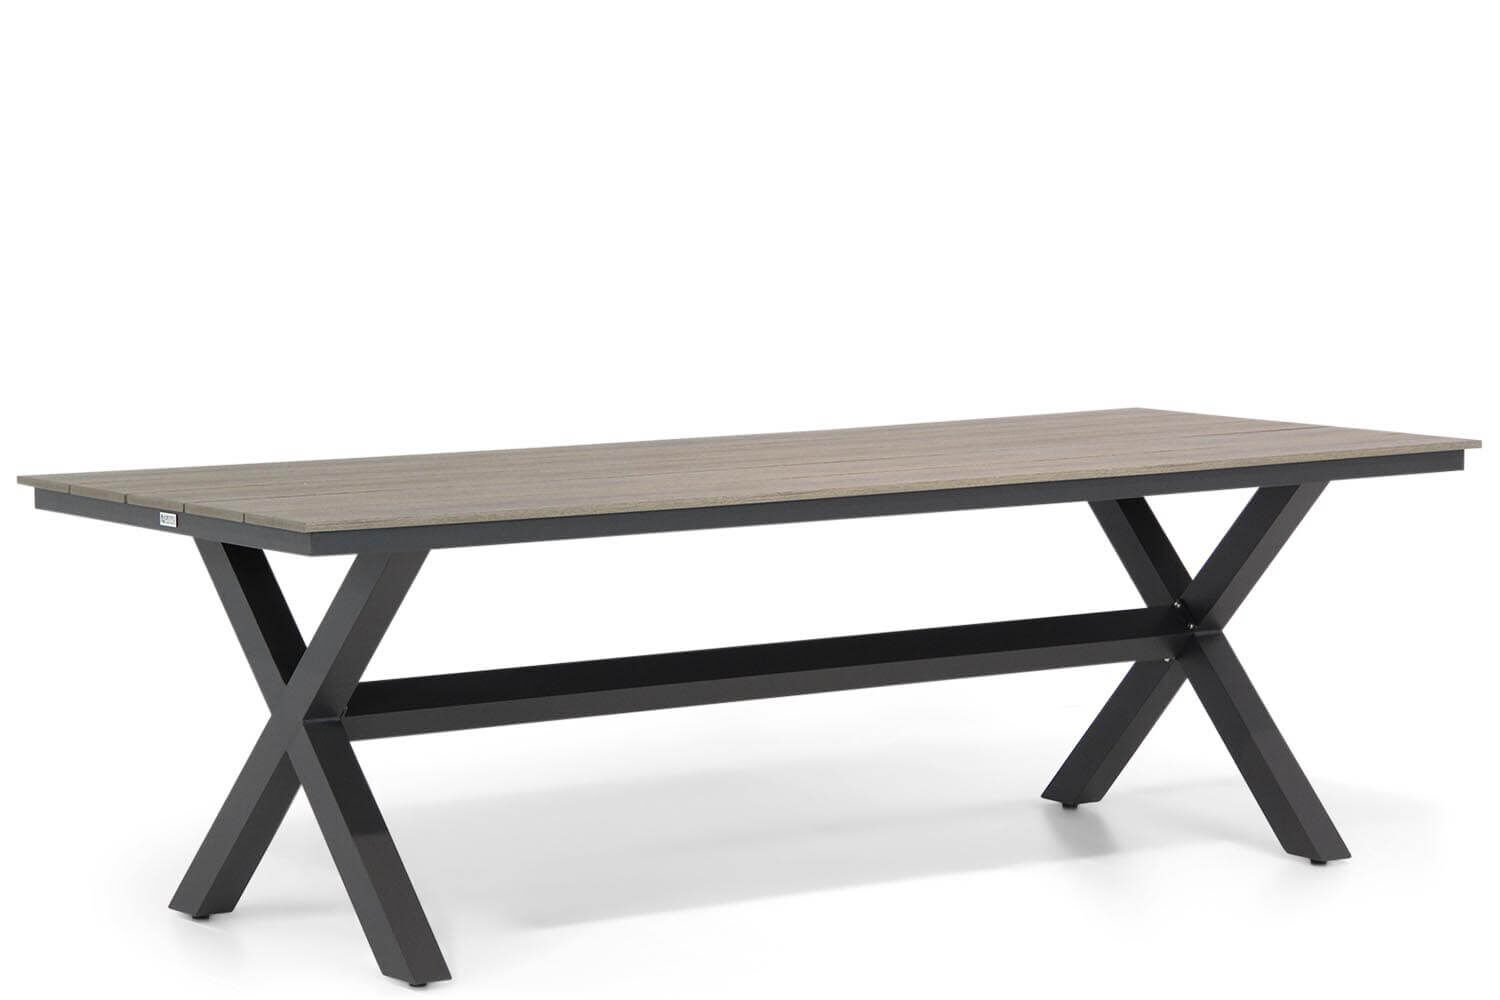 Motel Kaal Standaard Lifestyle Forest dining tuintafel 240 x 92 cm - Tuinmeubelshop.nl